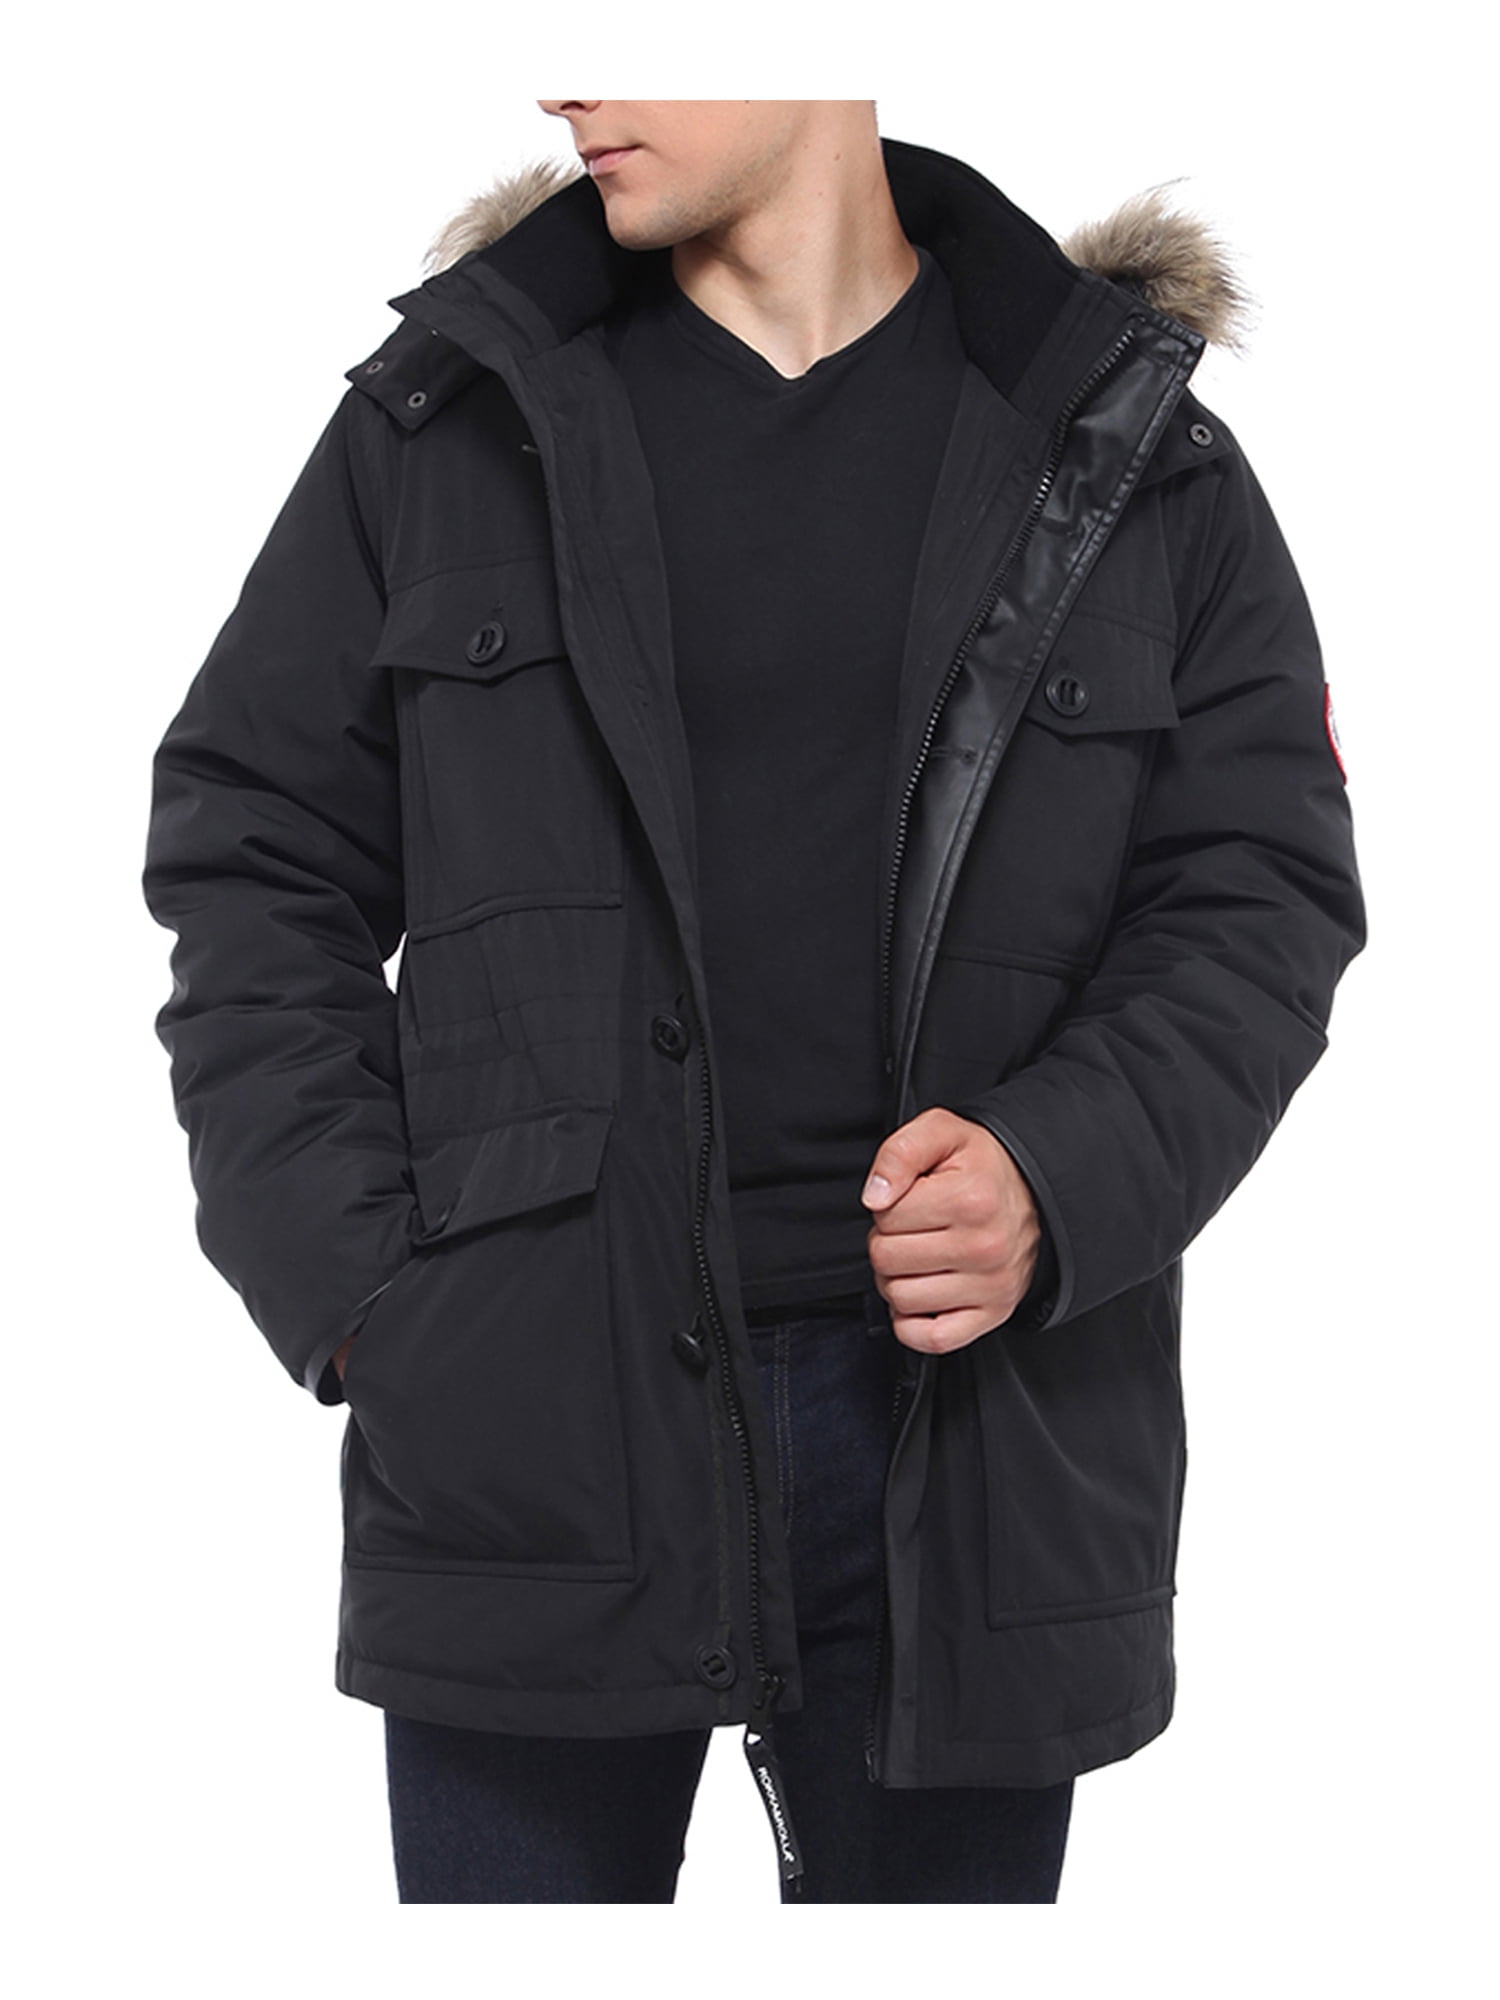 Men Down Snow Jacket Fur Hooded Coat Puffer Black Business Parka Thicken Zsell 